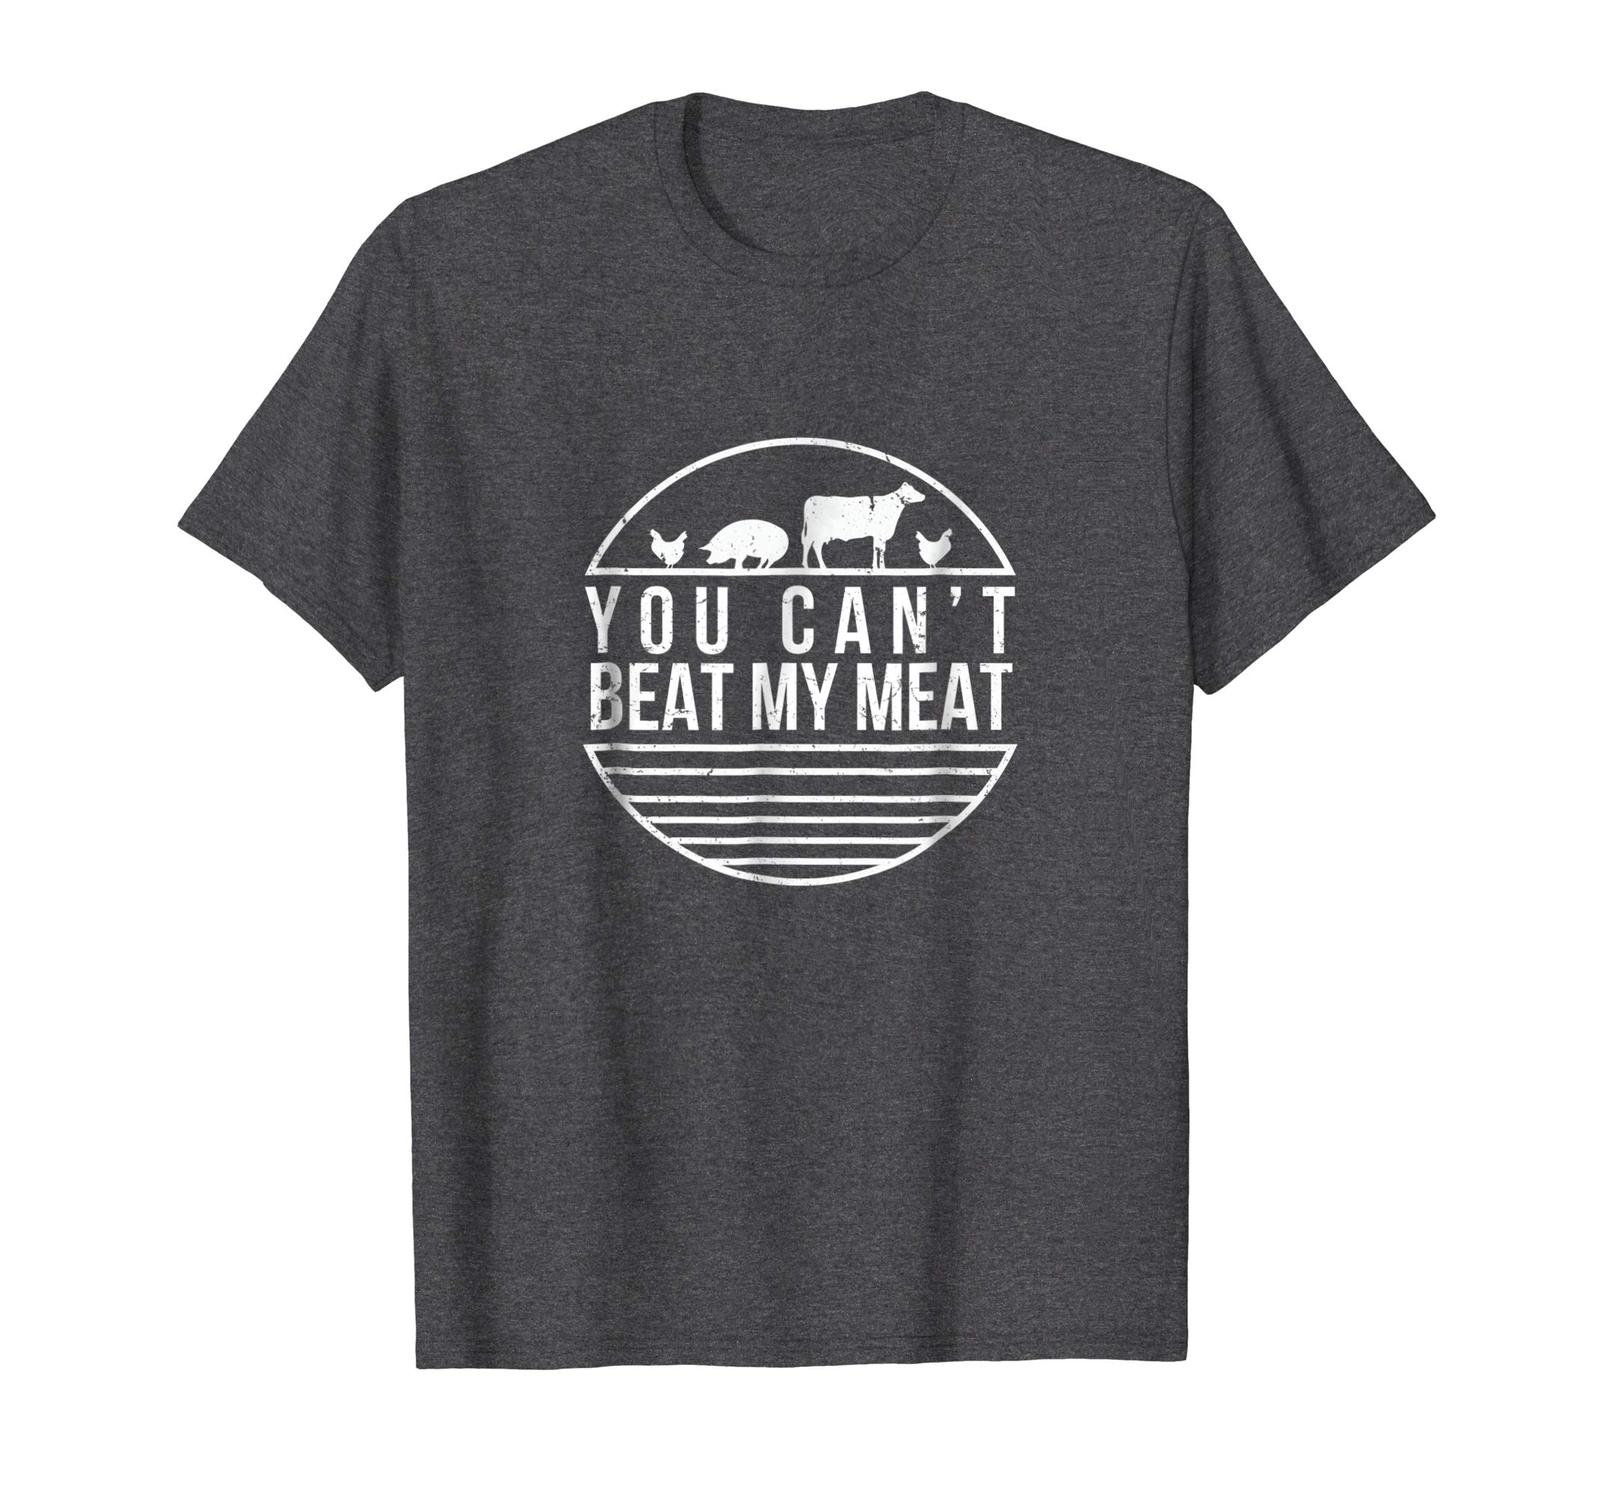 Dad Shirts - You Can't Beat My Meat Funny BBQ Grilling Smoking T Shirt ...